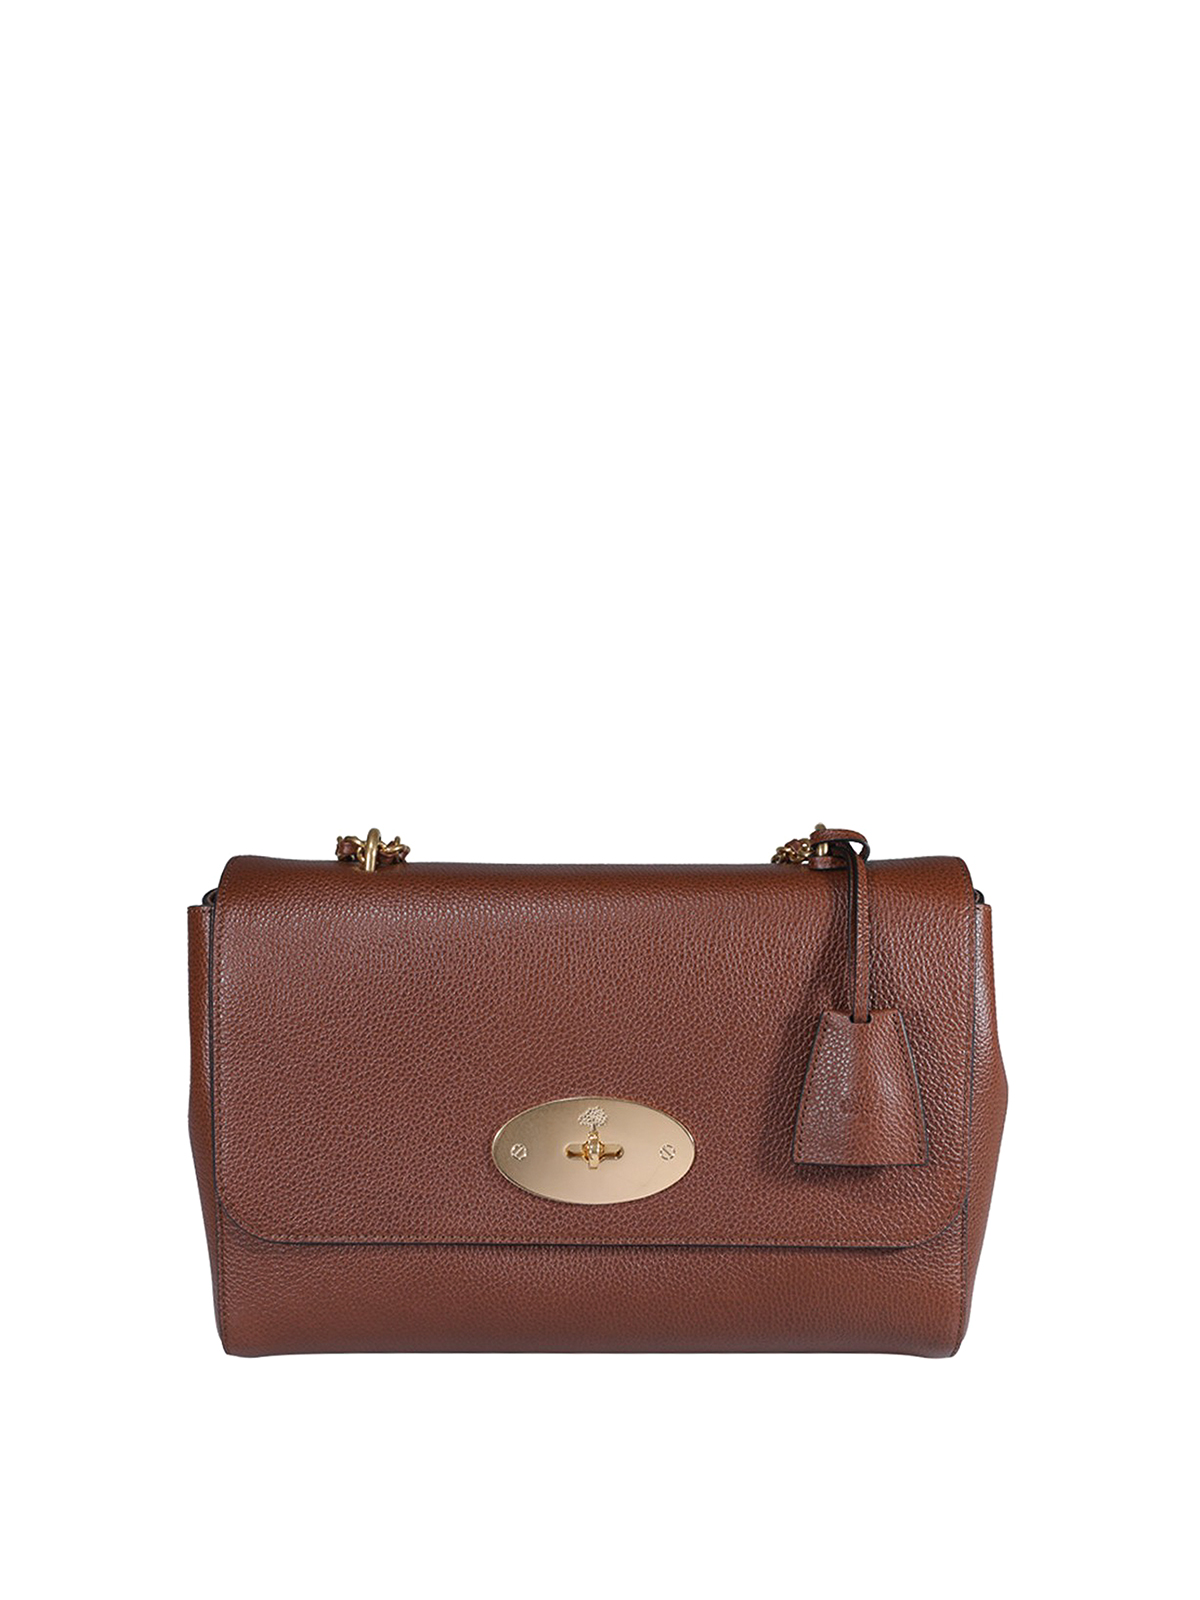 Mulberry Leather Clutch In Brown